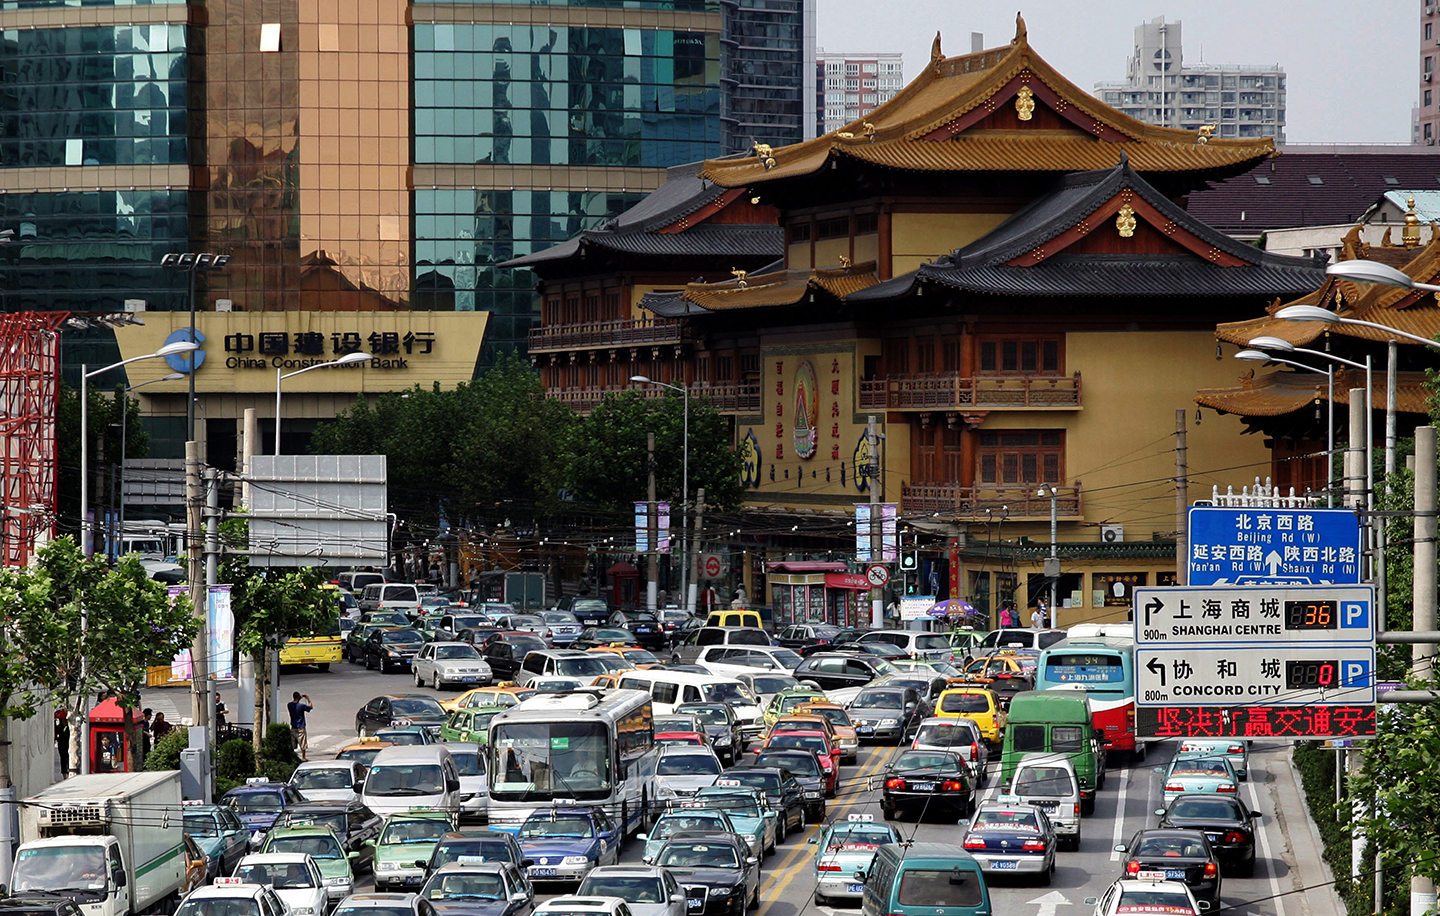 Traffic at a busy intersection in front of a buddhist temple in the centre of Shanghai, China.